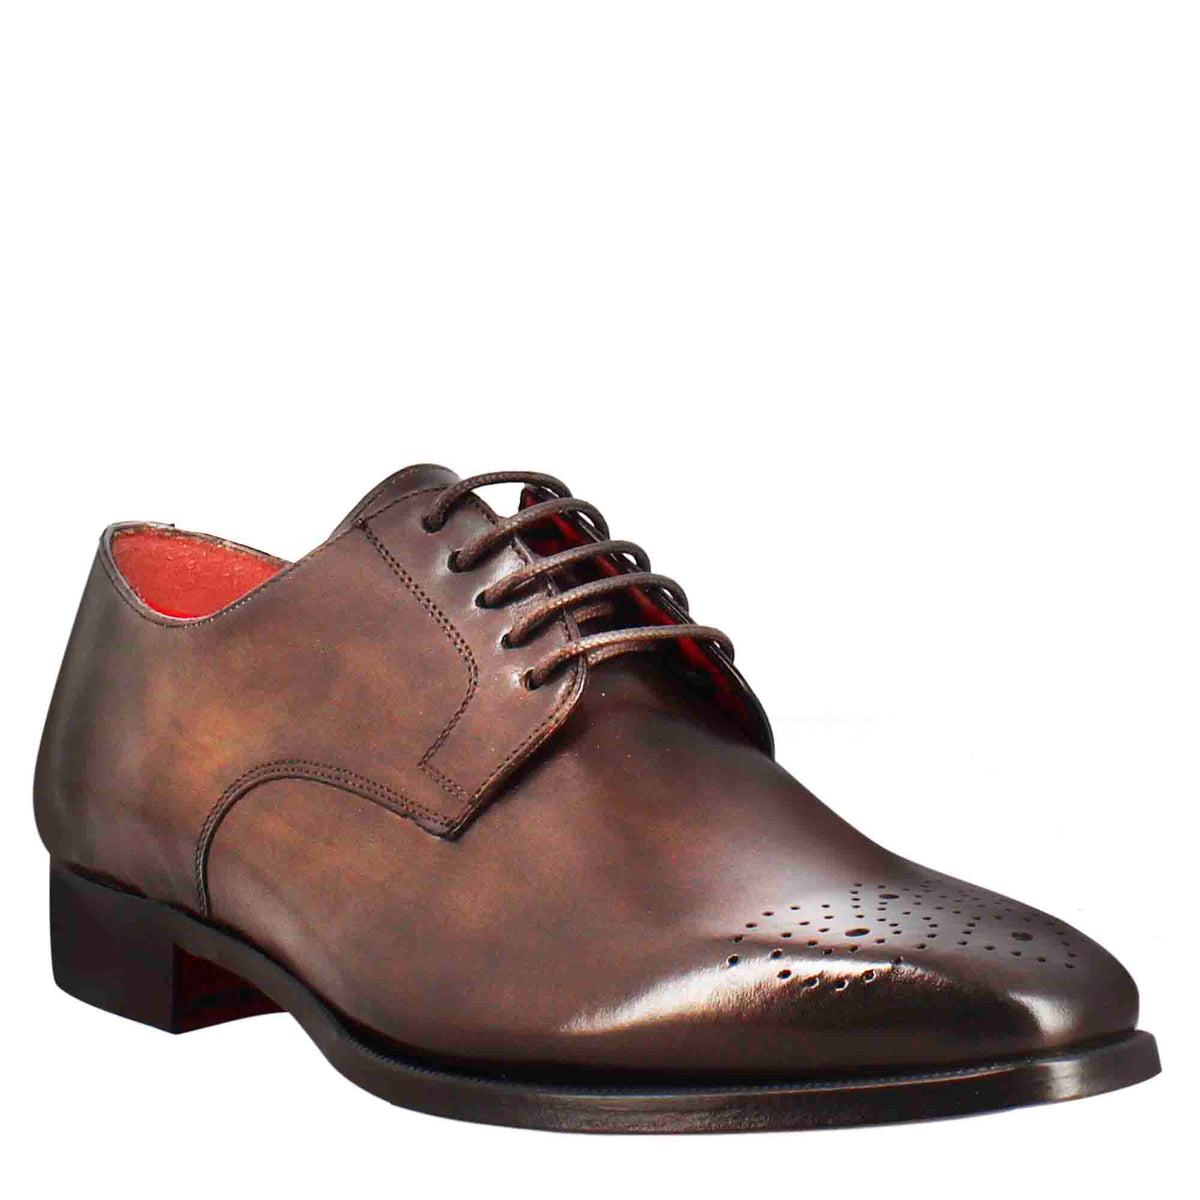 Men's derby in dark brown leather with square toe with design